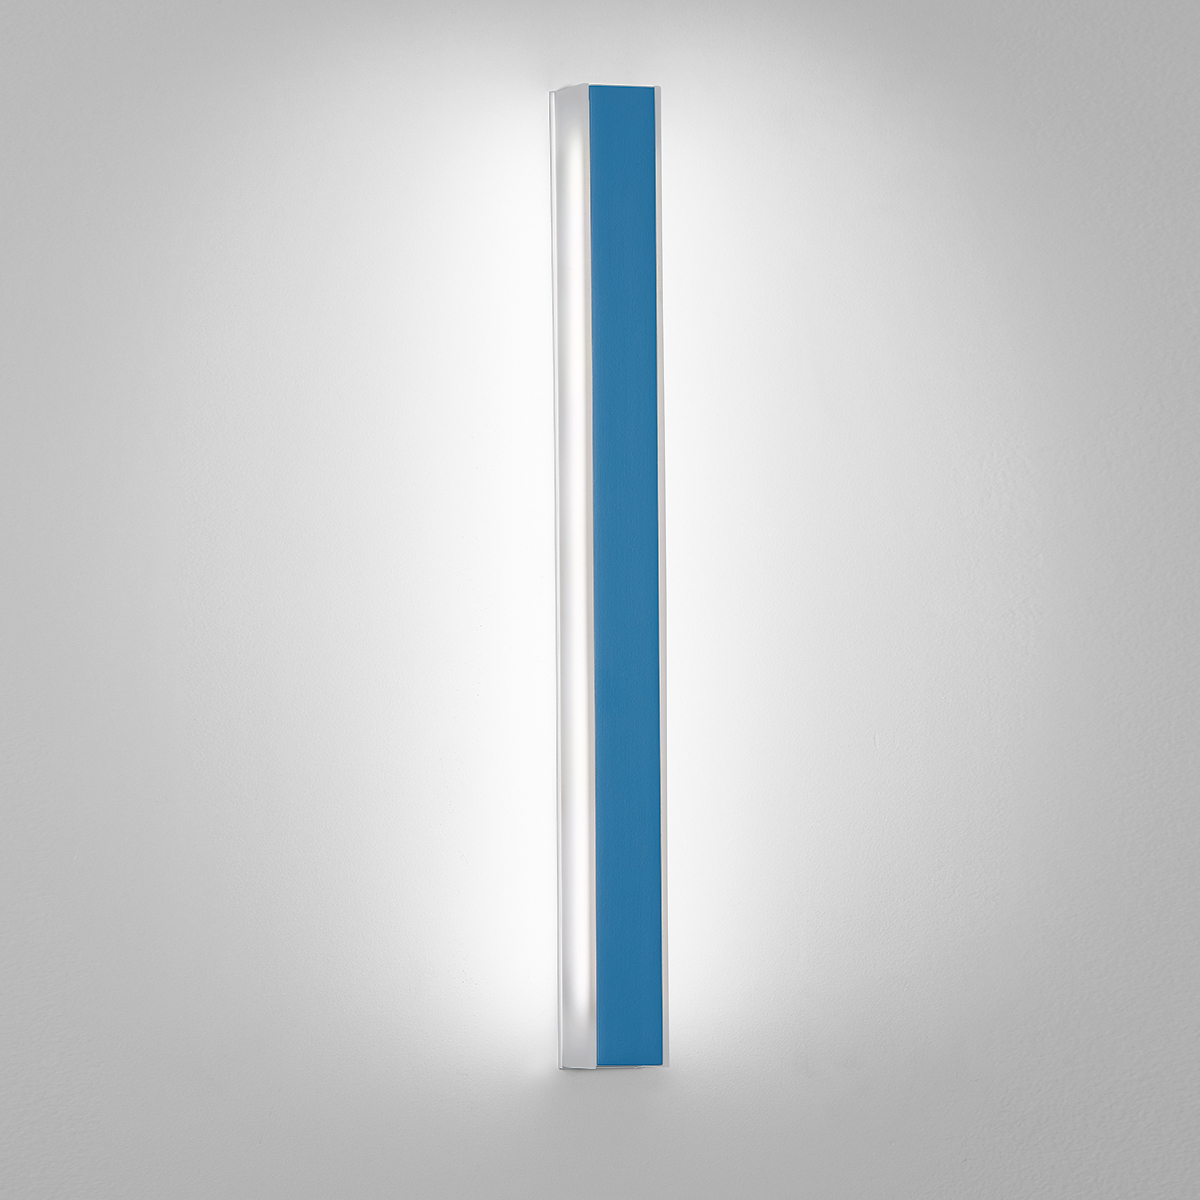 A thin, surface mounted luminaire with a linear body and soft side lighting